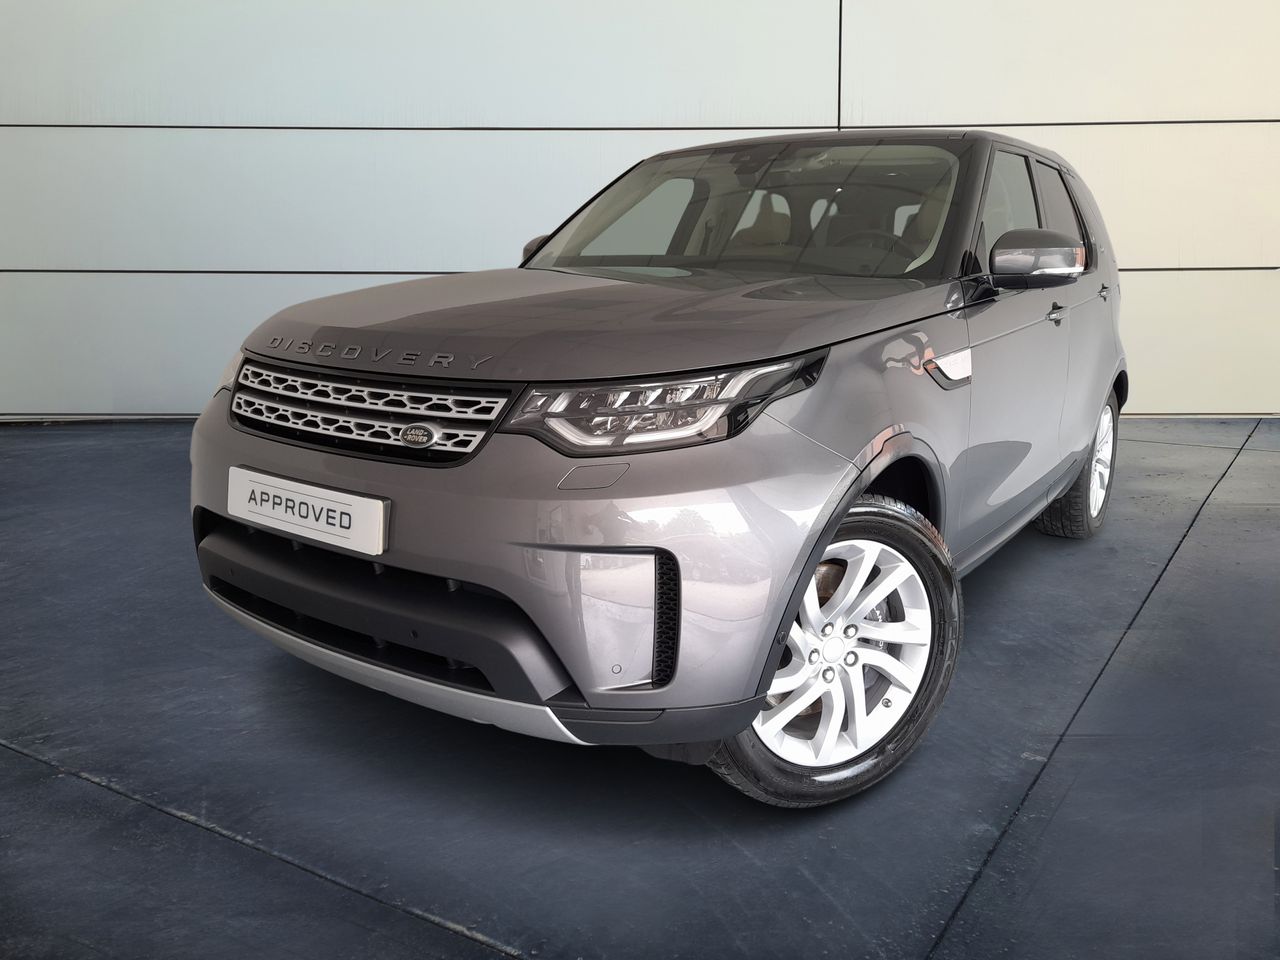 Land-Rover Discovery 3.0 SDV6 225kW (306CV) HSE Auto  - Foto 1